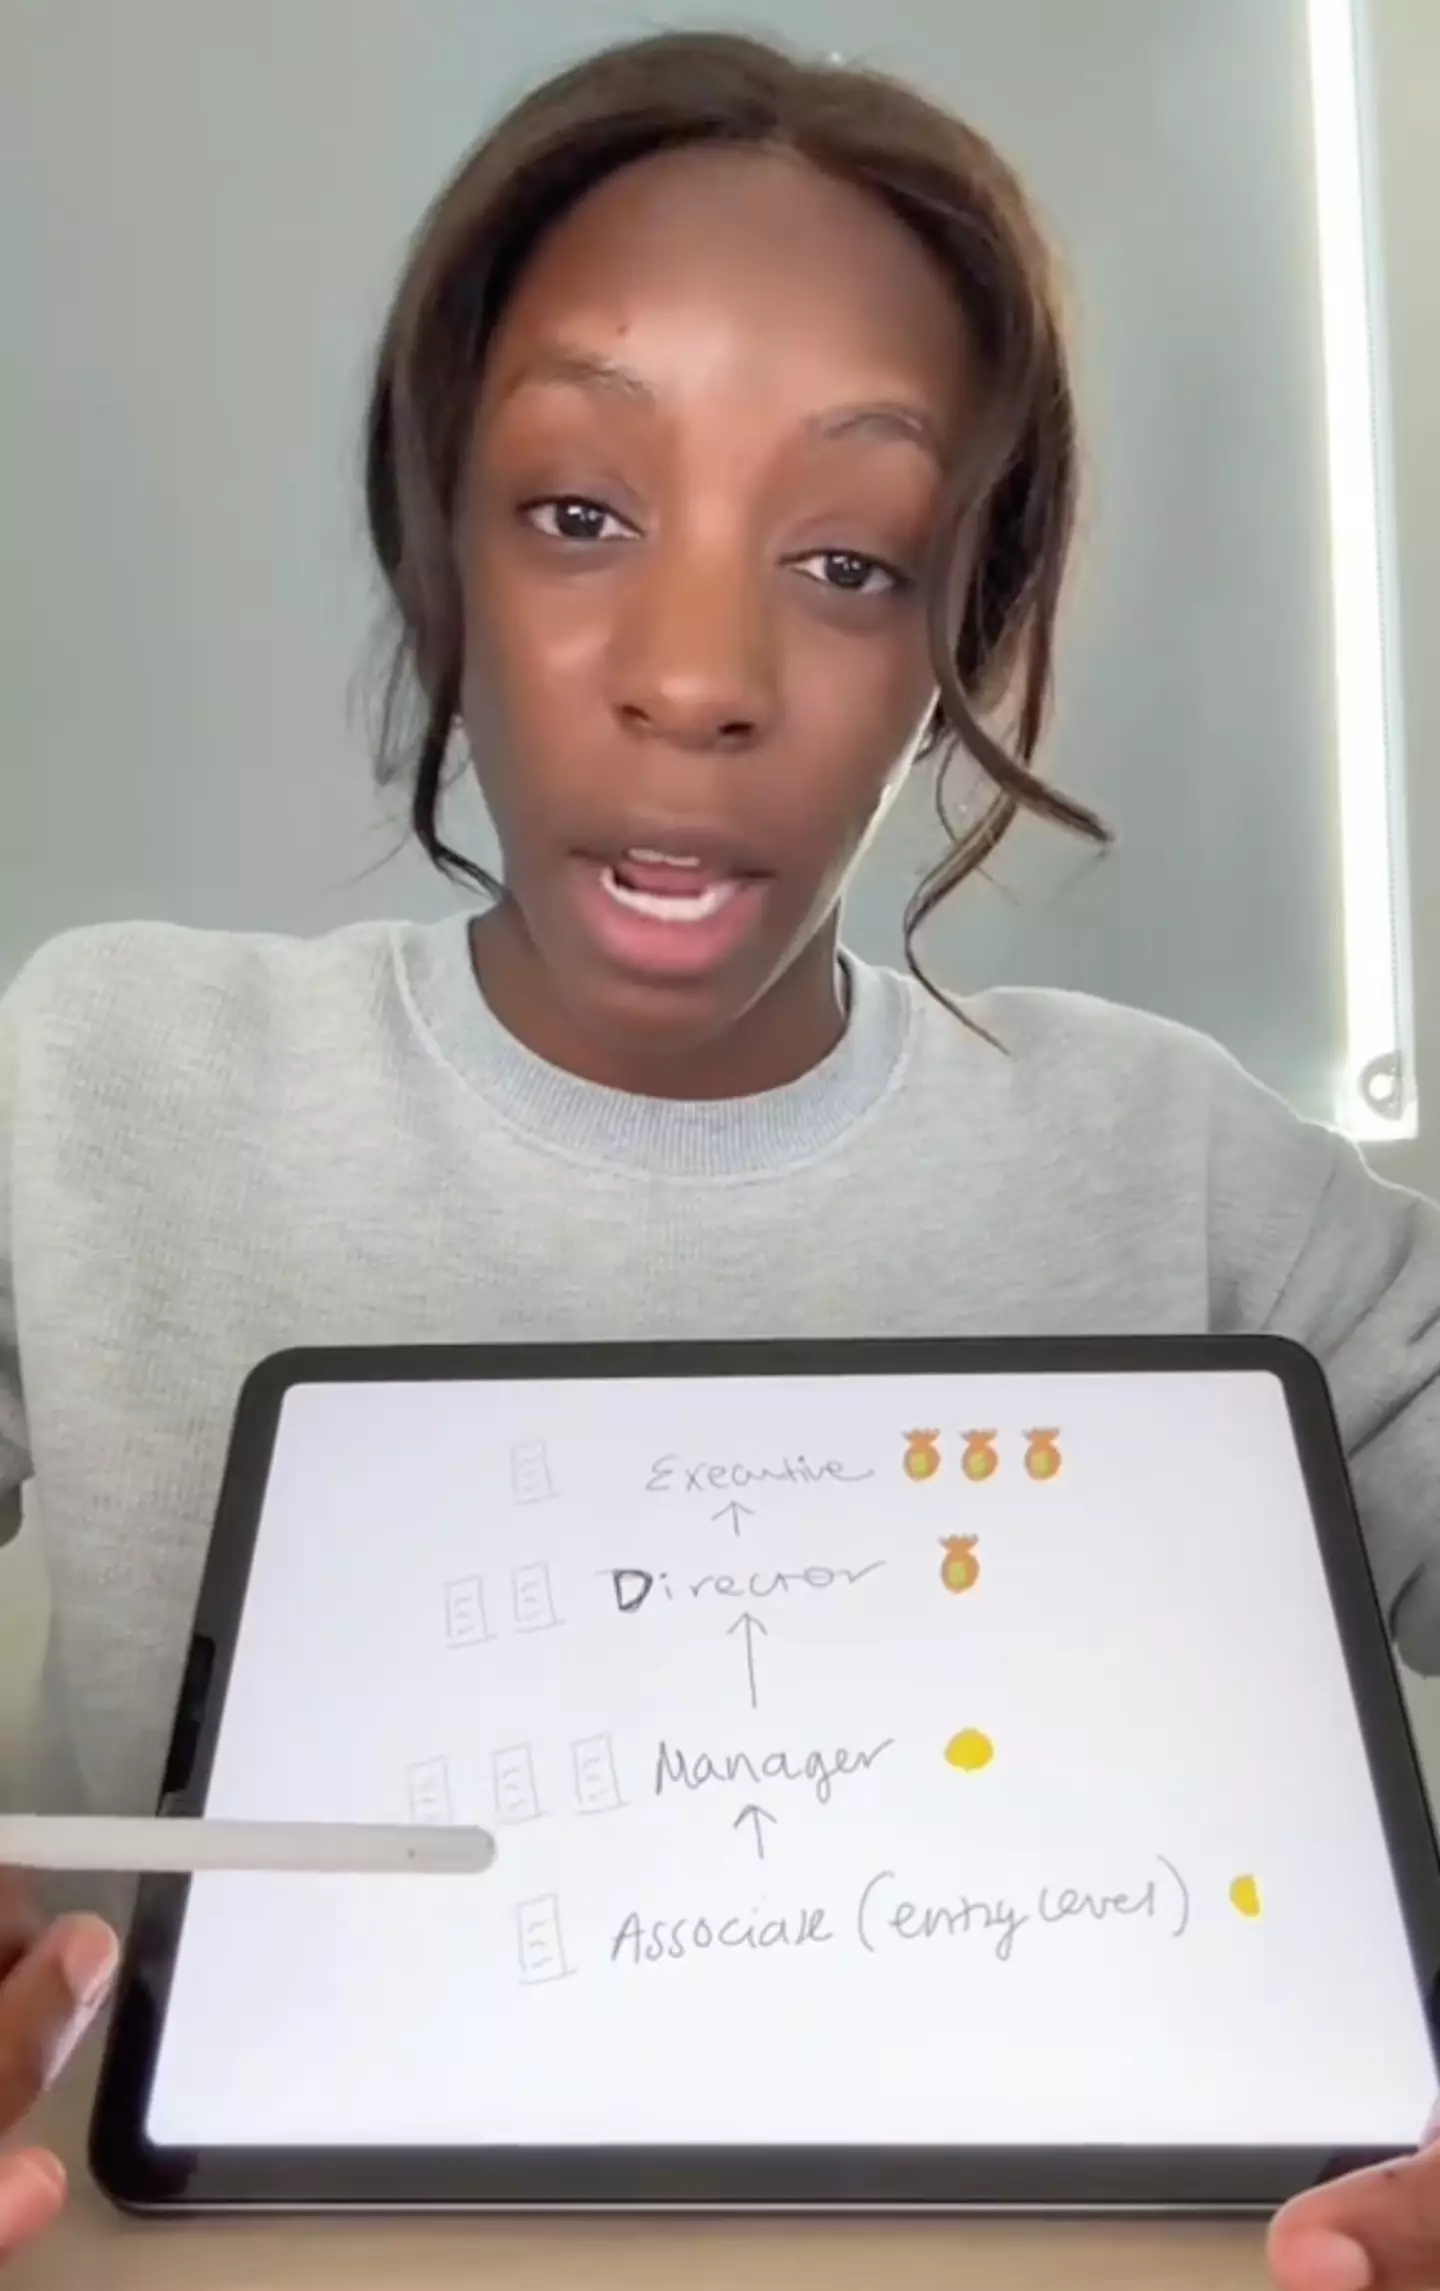 Kyyah Abdul explains with her 'doubloon' system.